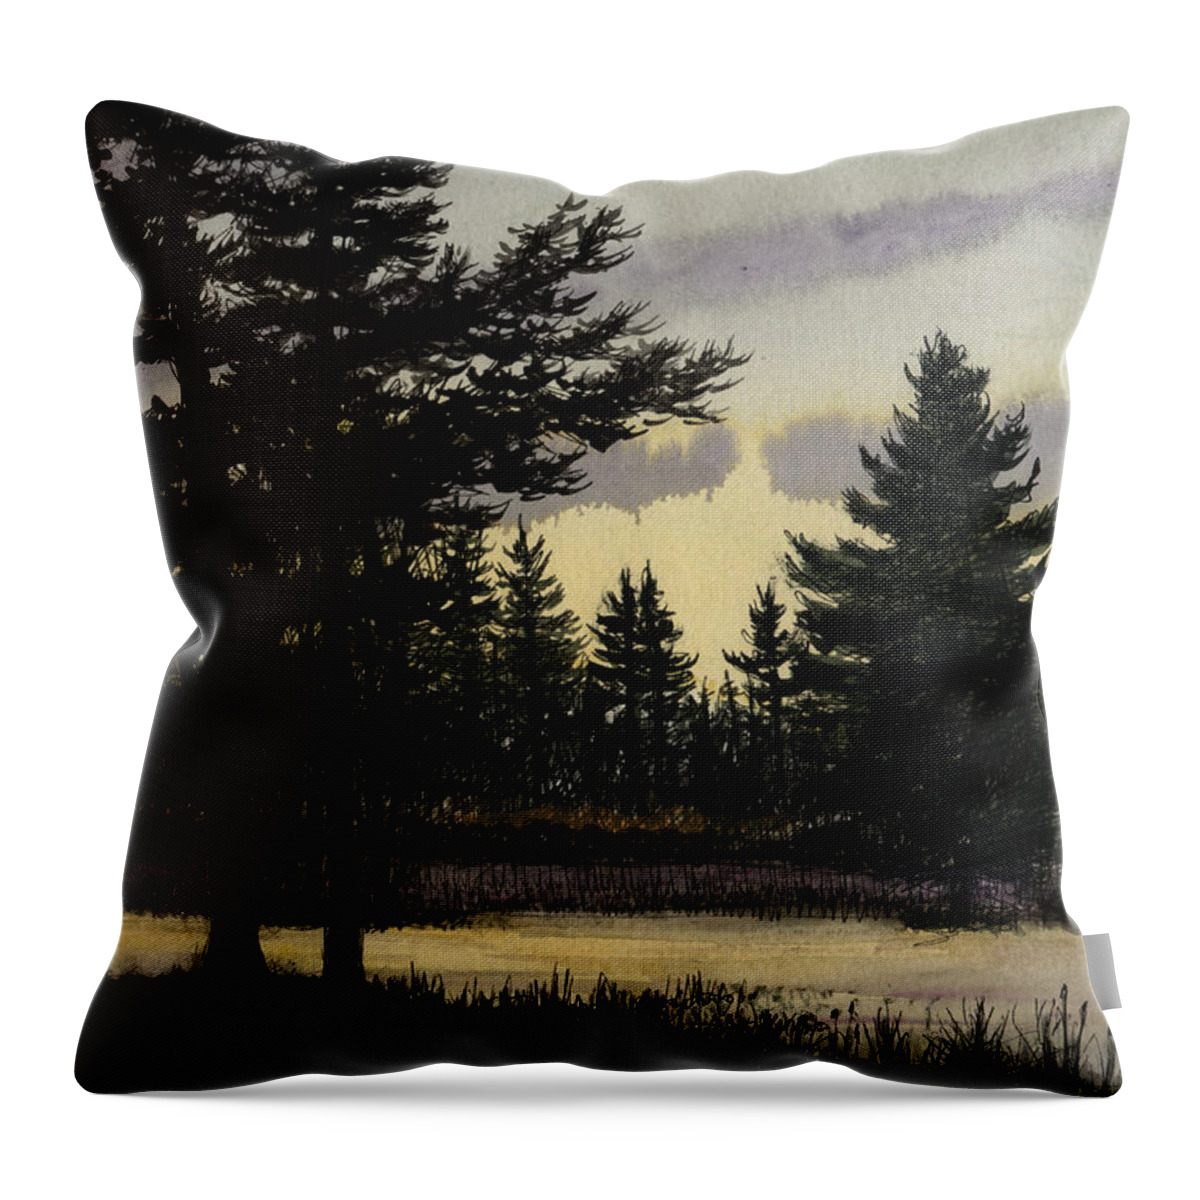 Landscape Throw Pillow featuring the painting Swallow Hollow by Arthur Barnes